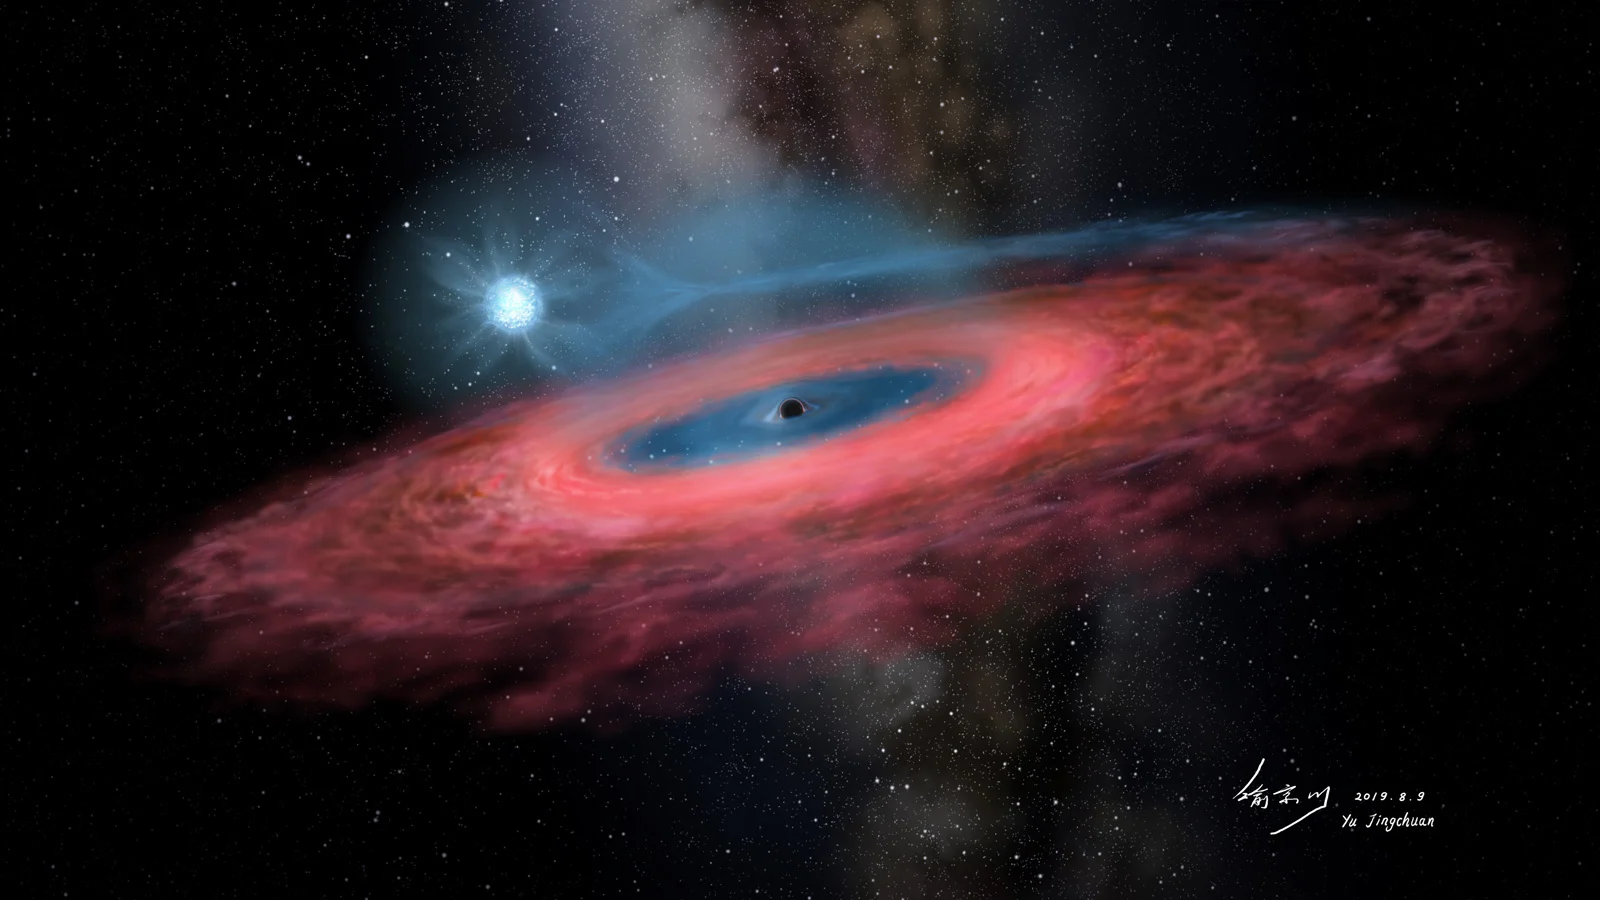 Black hole found in our galaxy is so massive it 'should not even exist'